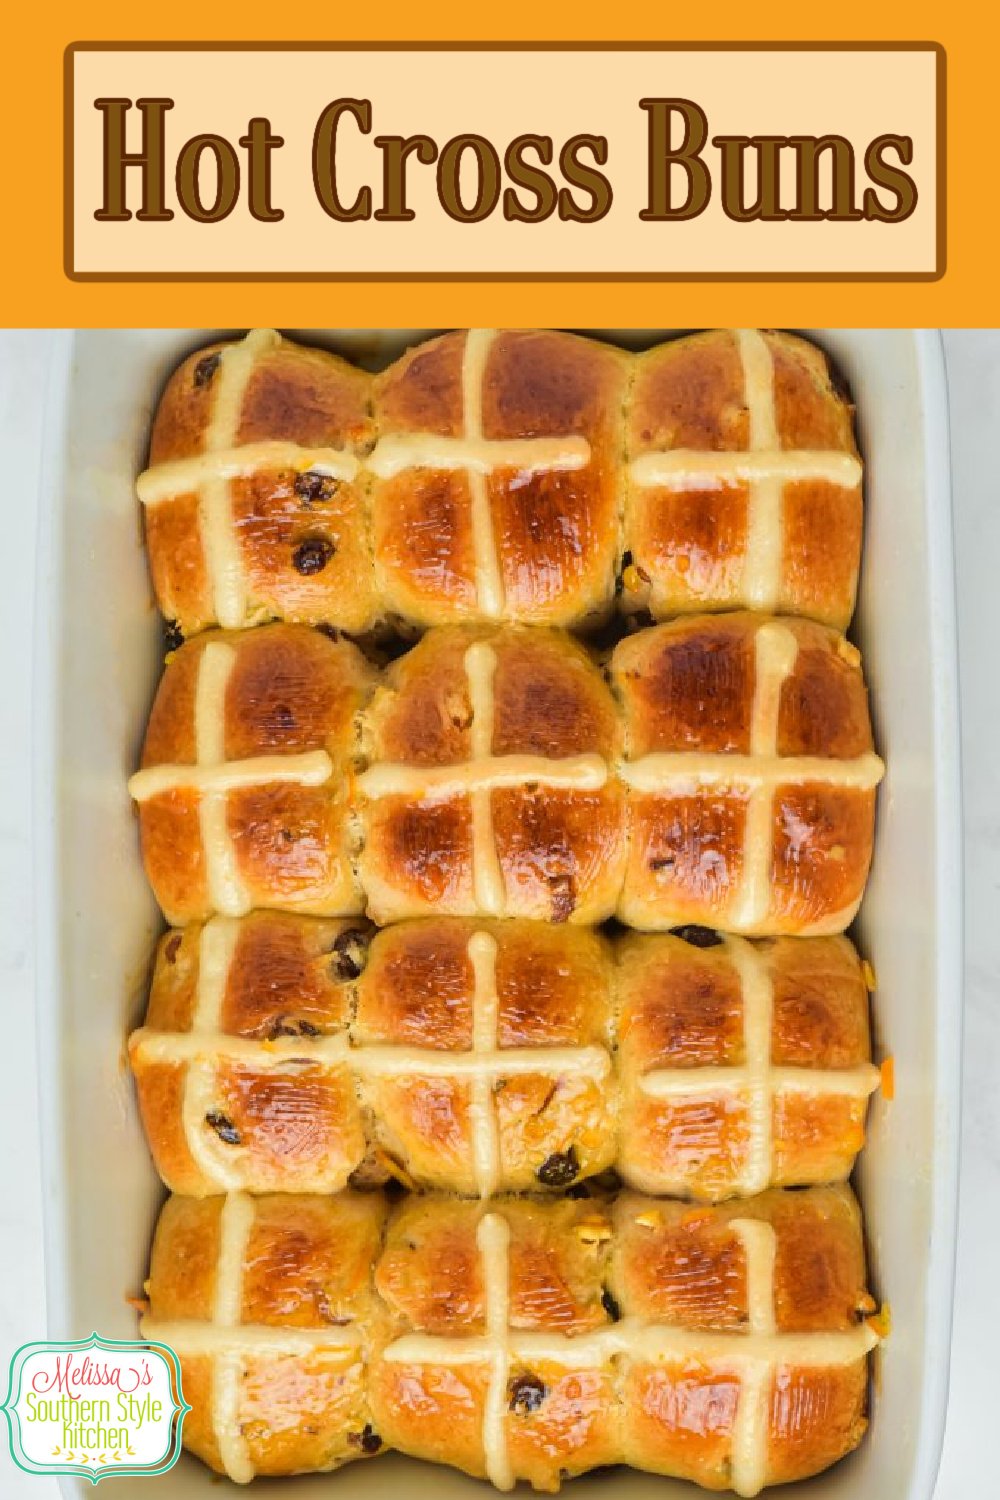 These homemade Hot Cross Buns feature a scratch made yeast dough that's filled with sweet raisins and candied orange peel area must-make for Easter #hotcrossbuns #hotcrossbunsrecipe #easterrecipes #easterbrunch #breakfast #candiedorangepeel #besteasterrecipes #easterbreakfastrecipes